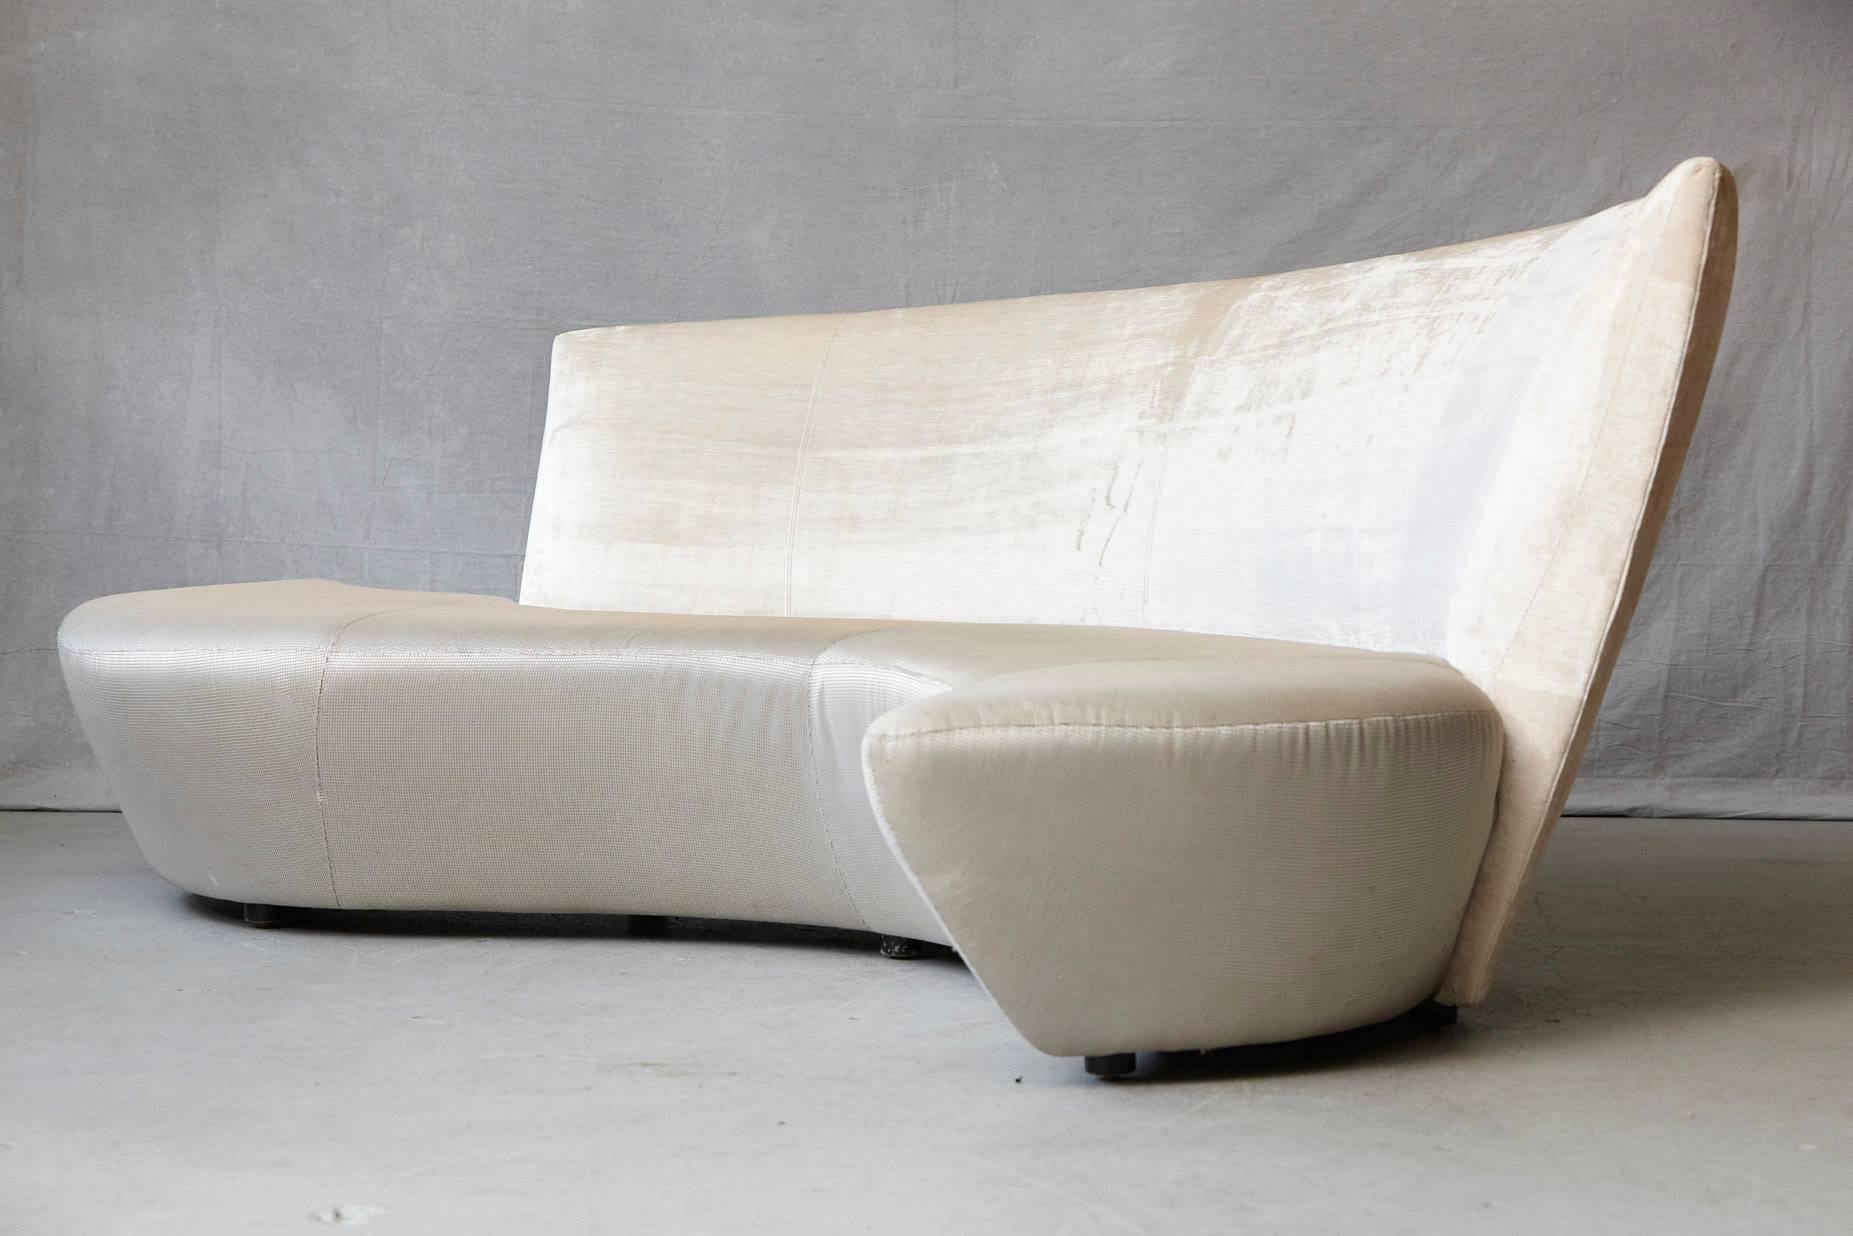 Sculptural sofa in a two-tone fabric combination of an ivory striae velvet for the back and a textured beige / sand tone fabric for the seat surface.
The name Bilbao sofa derived from Frank Gehry's famous Guggenheim Museum in Bilbao, which was the